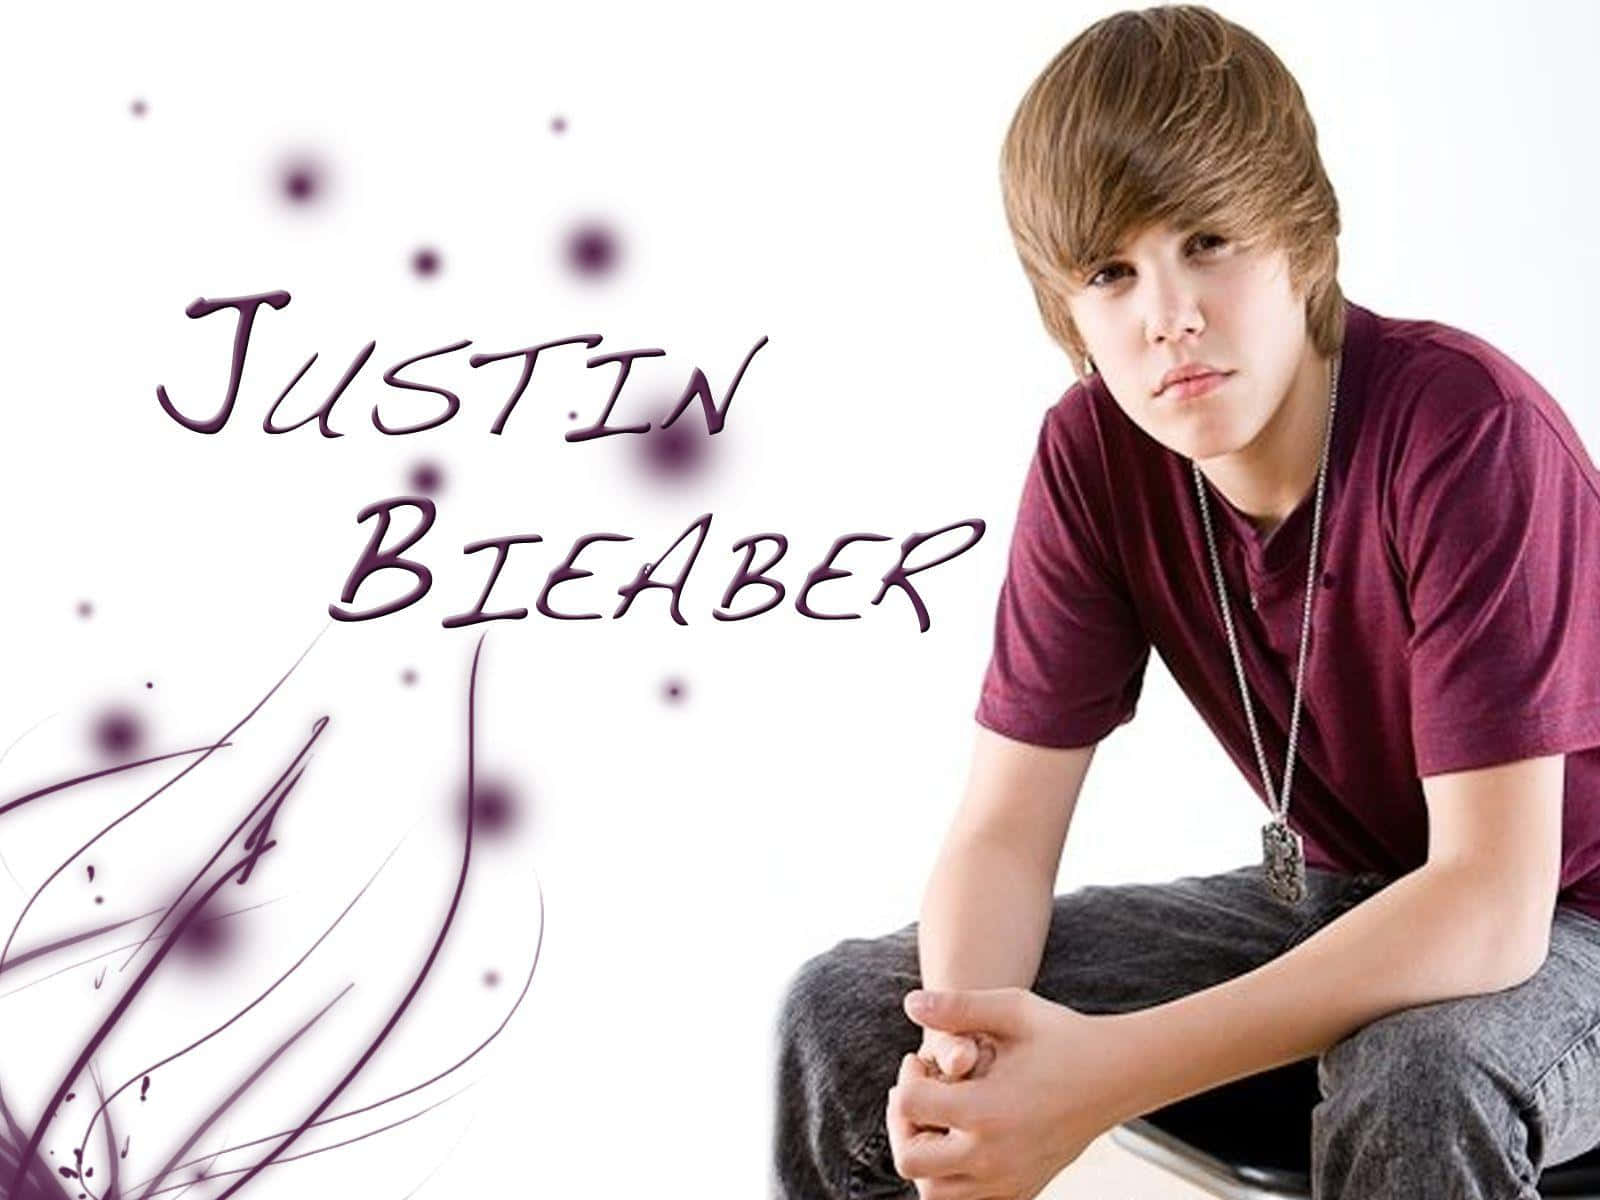 Justin Bieber - winner of the American Music Award for Artist of the Decade